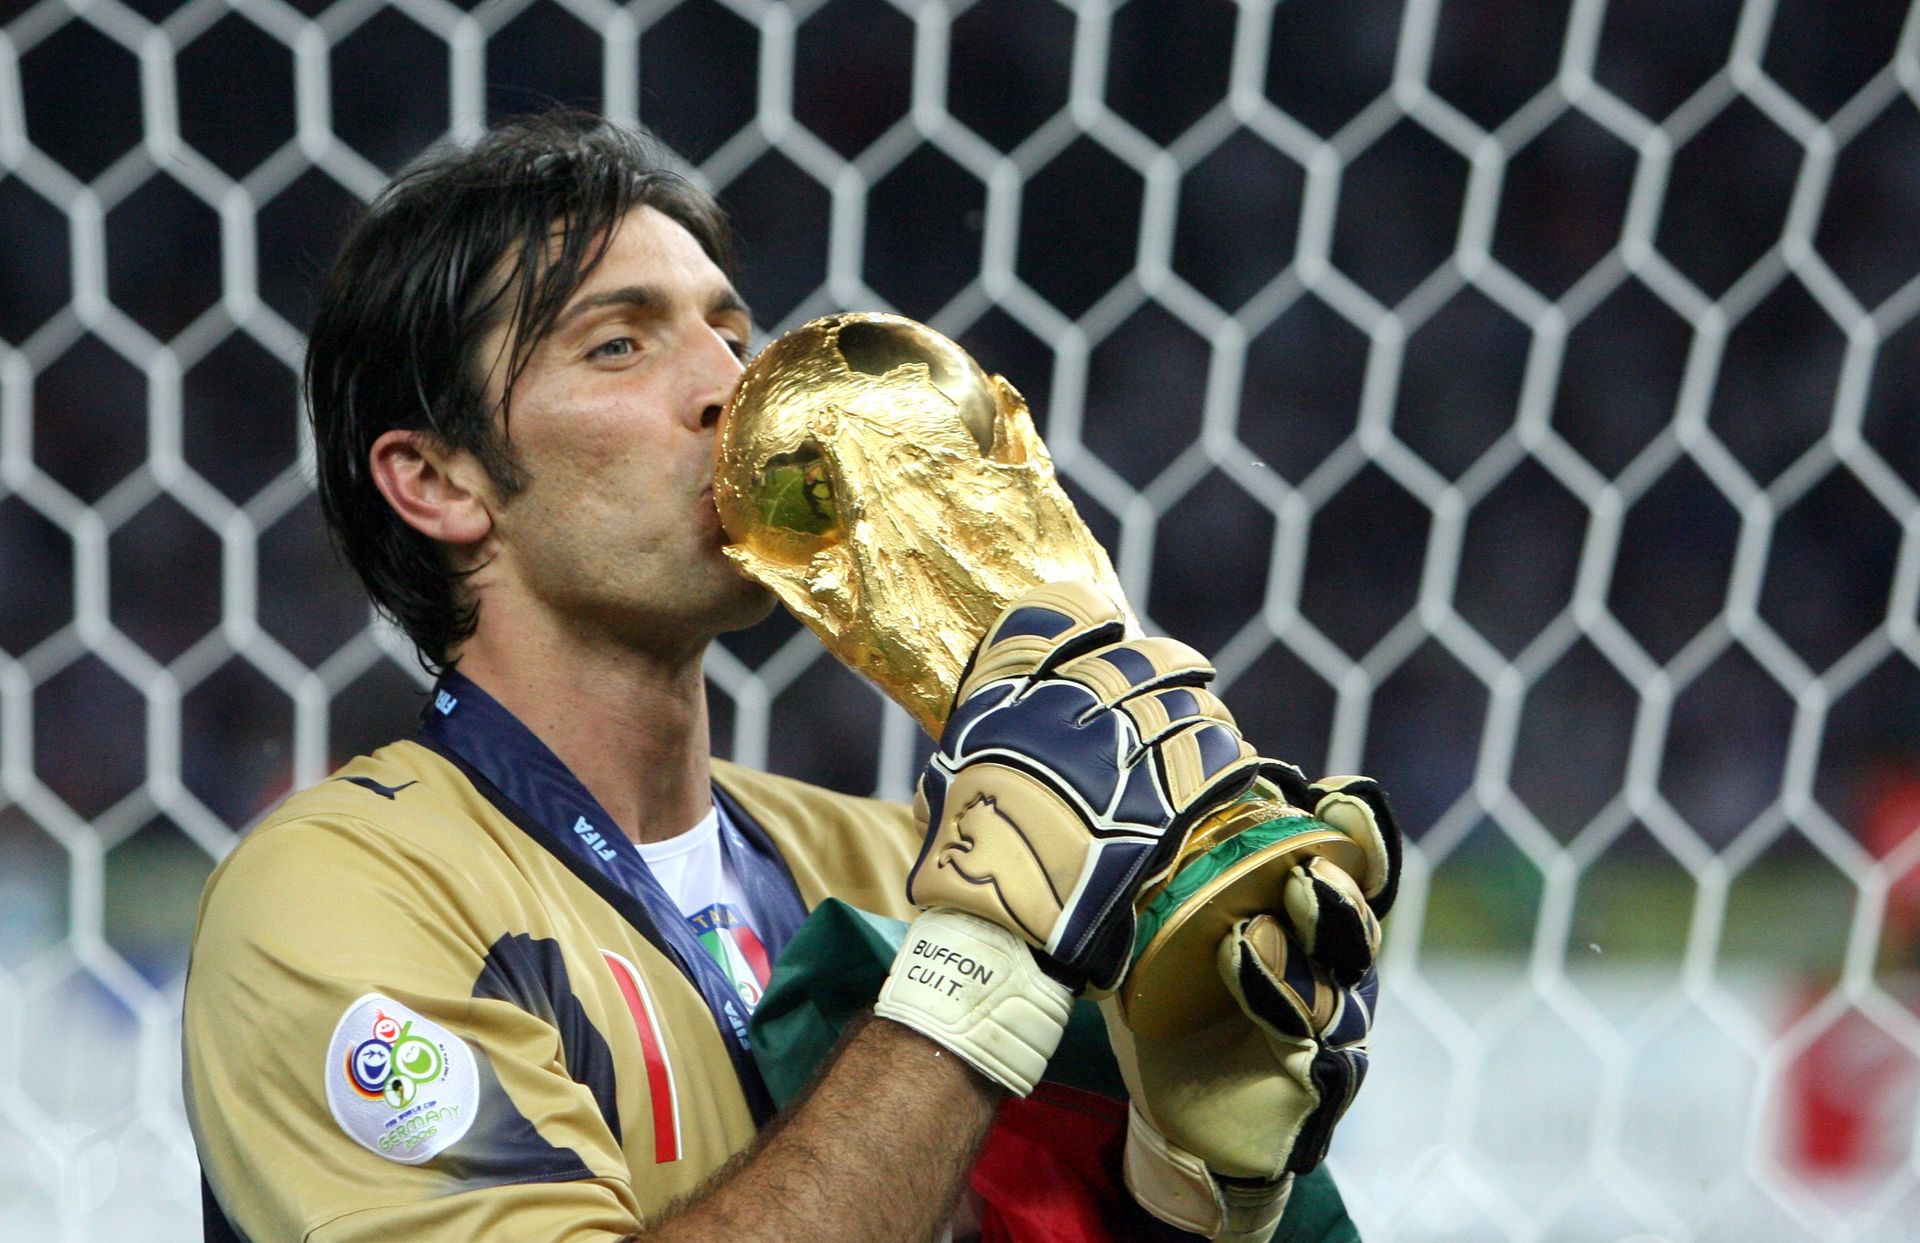 <p>                     Gianluigi Buffon was instrumental for Italy in their 2006 World Cup win, conceding only twice en route to the title – an own goal and a penalty.                   </p>                                      <p>                     Named world's best goalkeeper by IFFHS in 2003, 2004, 2006 and 2007, Buffon was also their best of the decade and a runner-up in the 2006 Ballon d'Or. Italy's first choice throughout the 2000s, he won 176 caps in total and is considered one of the greatest goalkeepers in football history.                   </p>